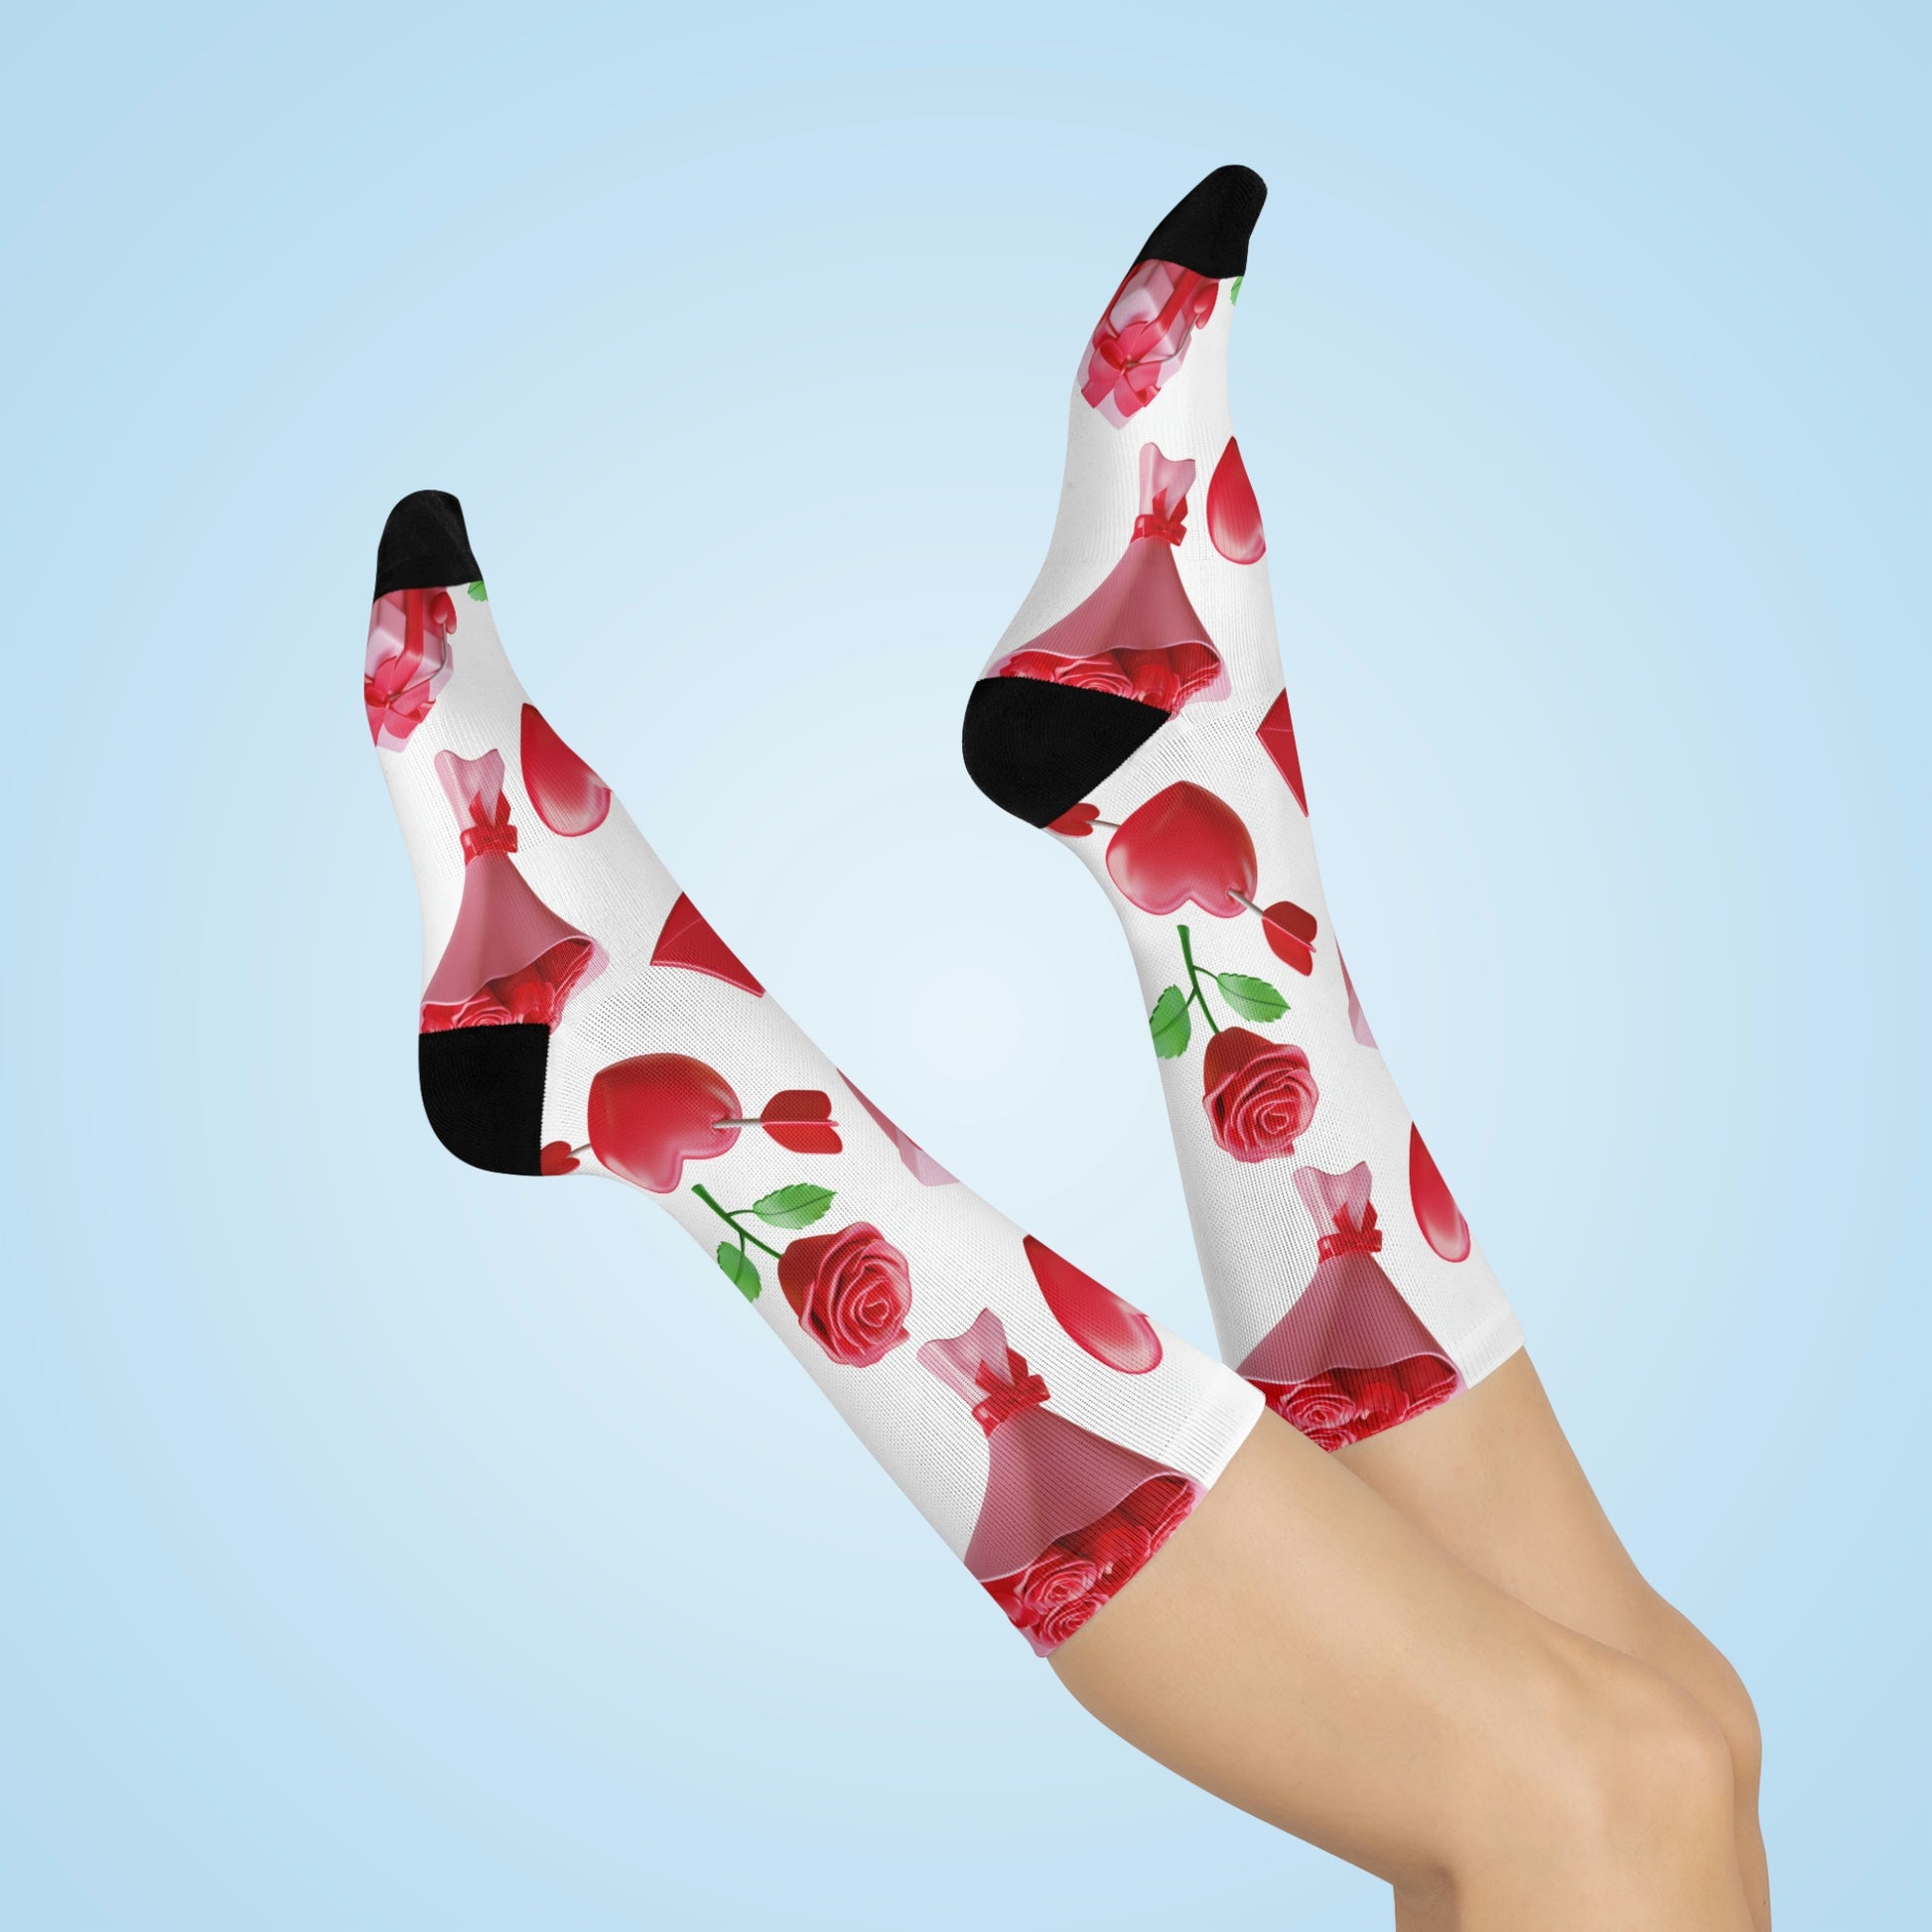 GIFT FOR YOU VALENTINES DAY SOCKS